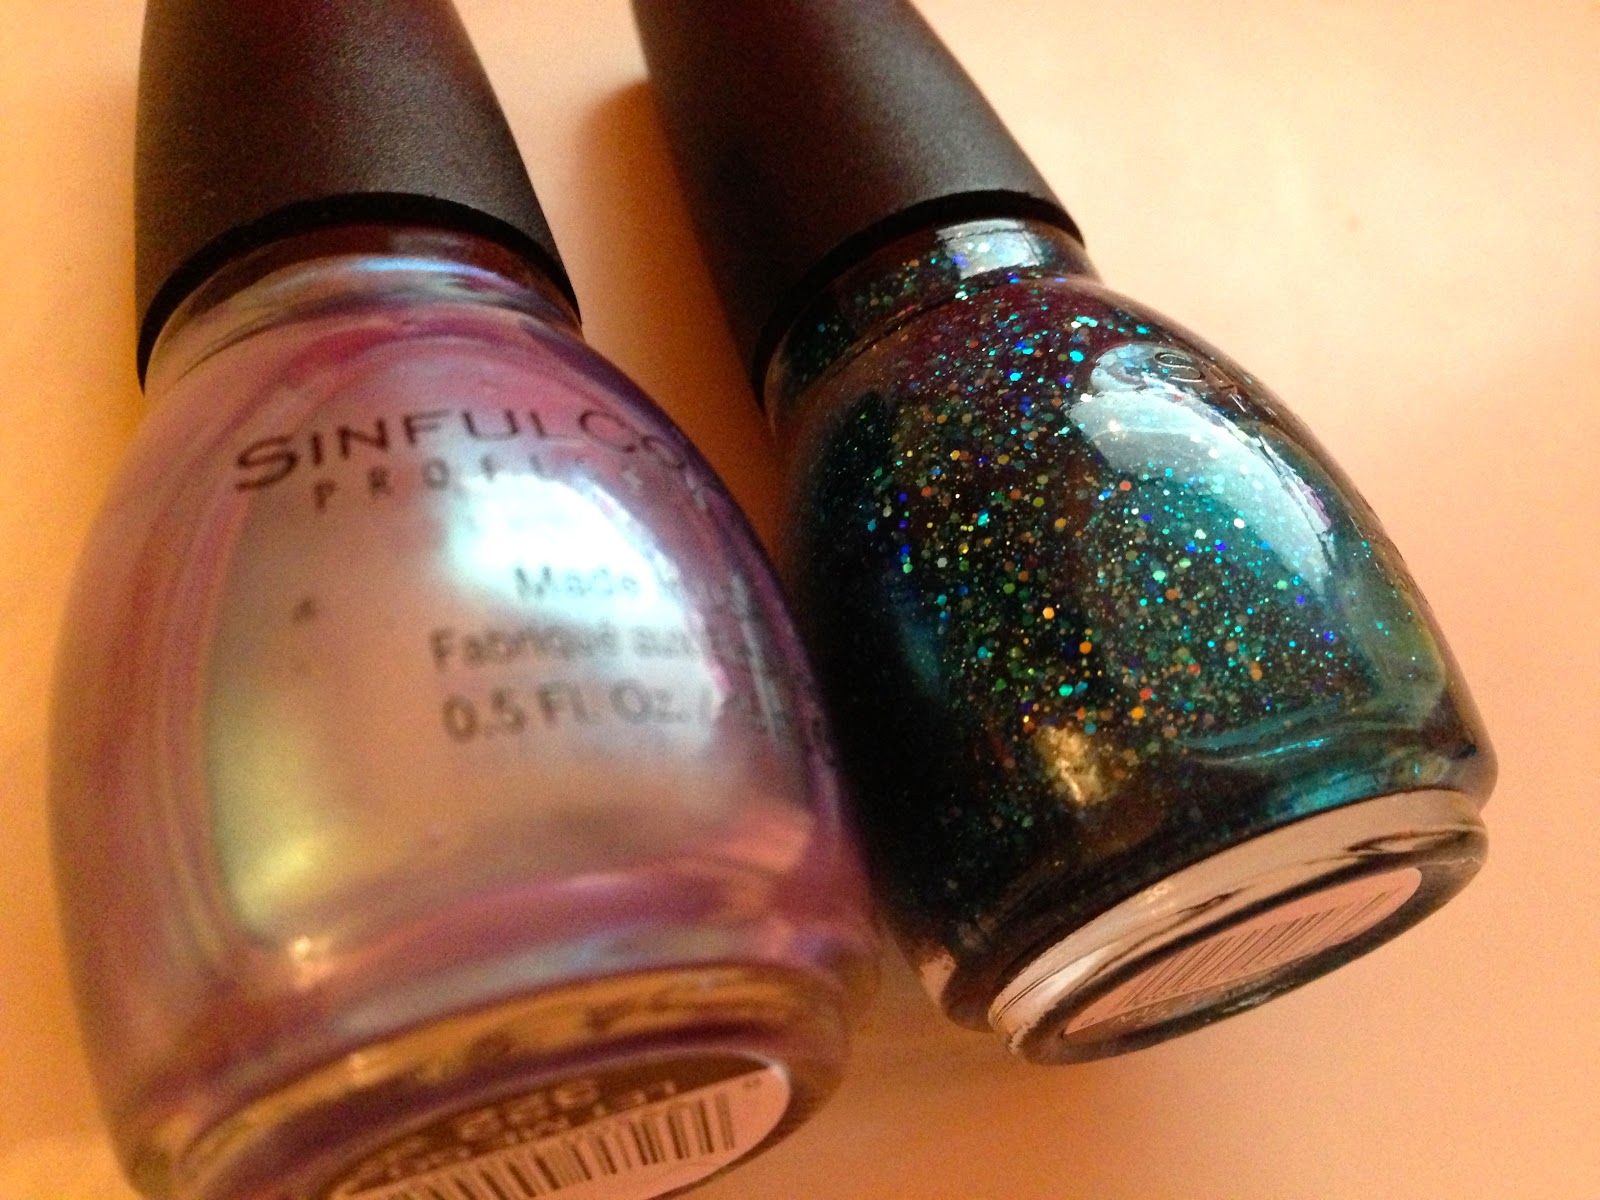 1. Sinful Colors Let Me Go Nail Polish - wide 6